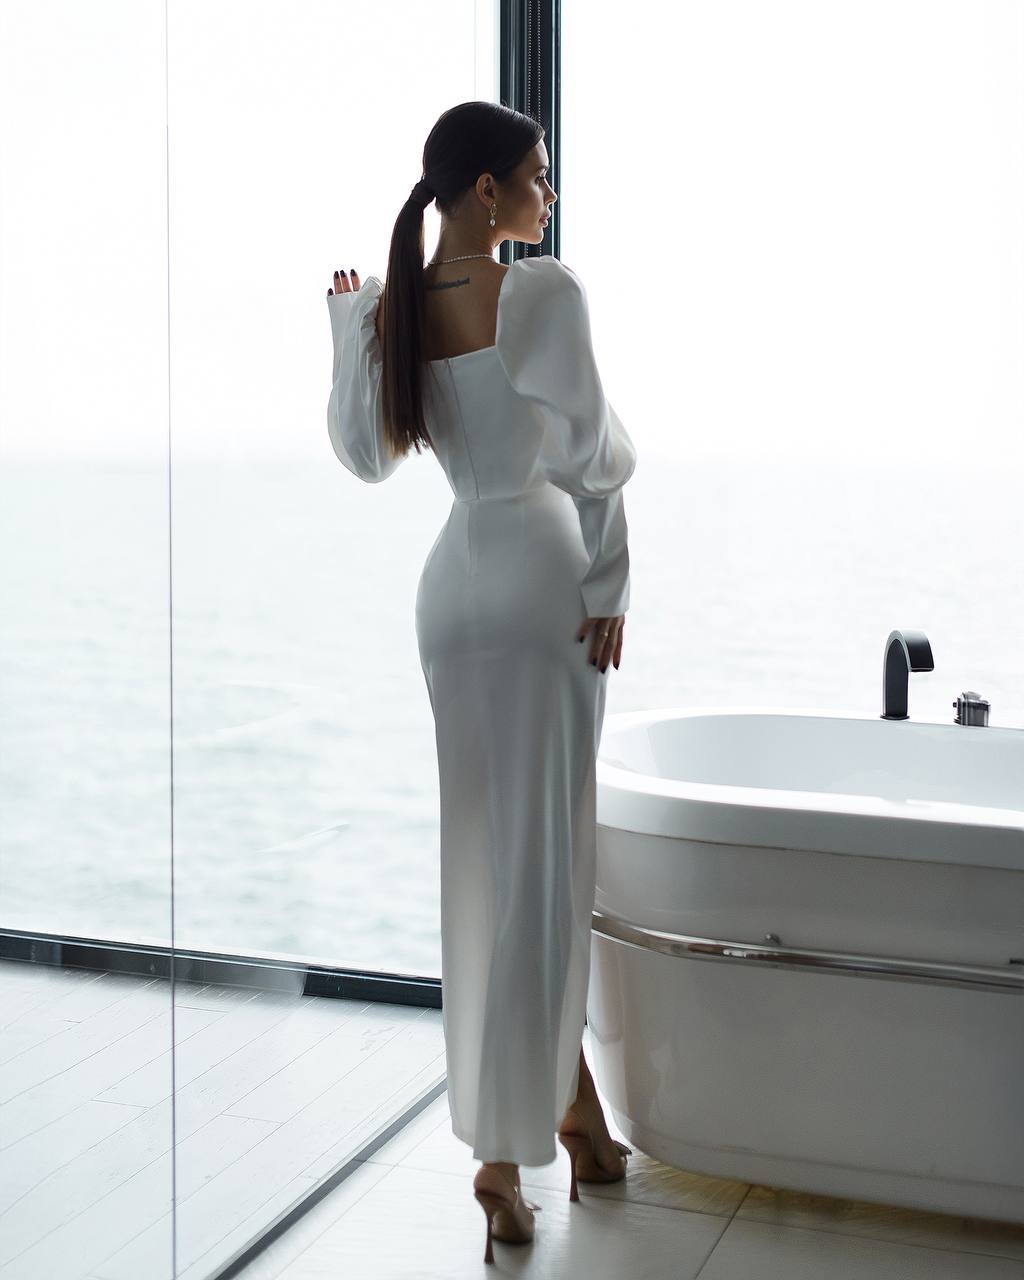 a woman in a white dress standing in front of a bathtub